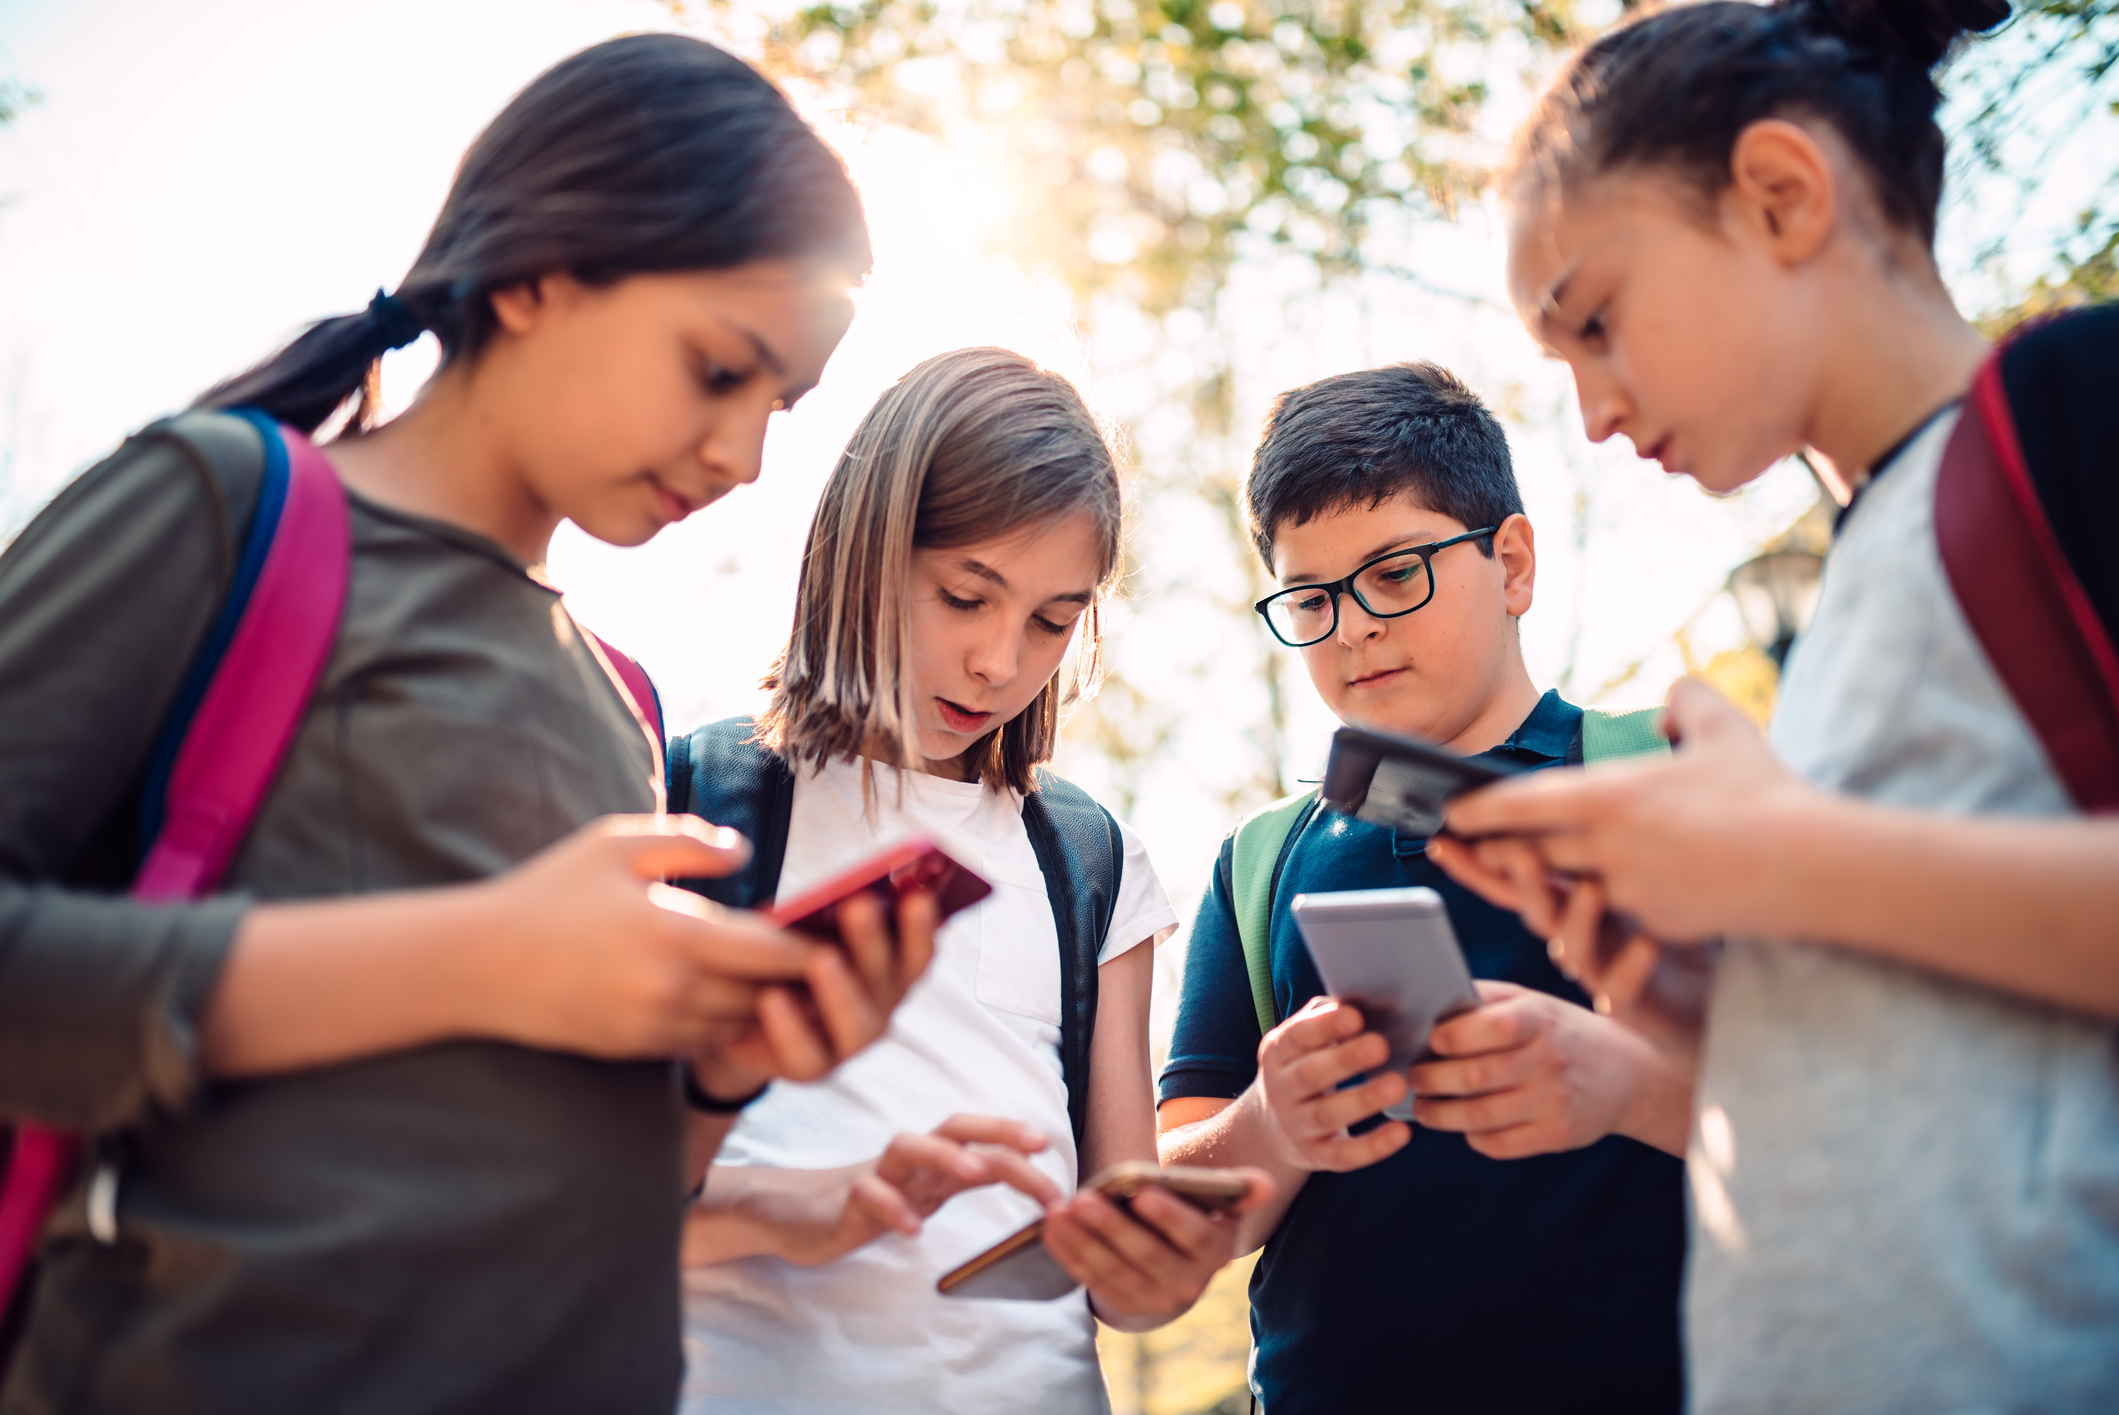 the photo shows a group of young kids in a circle playing on their smart phones